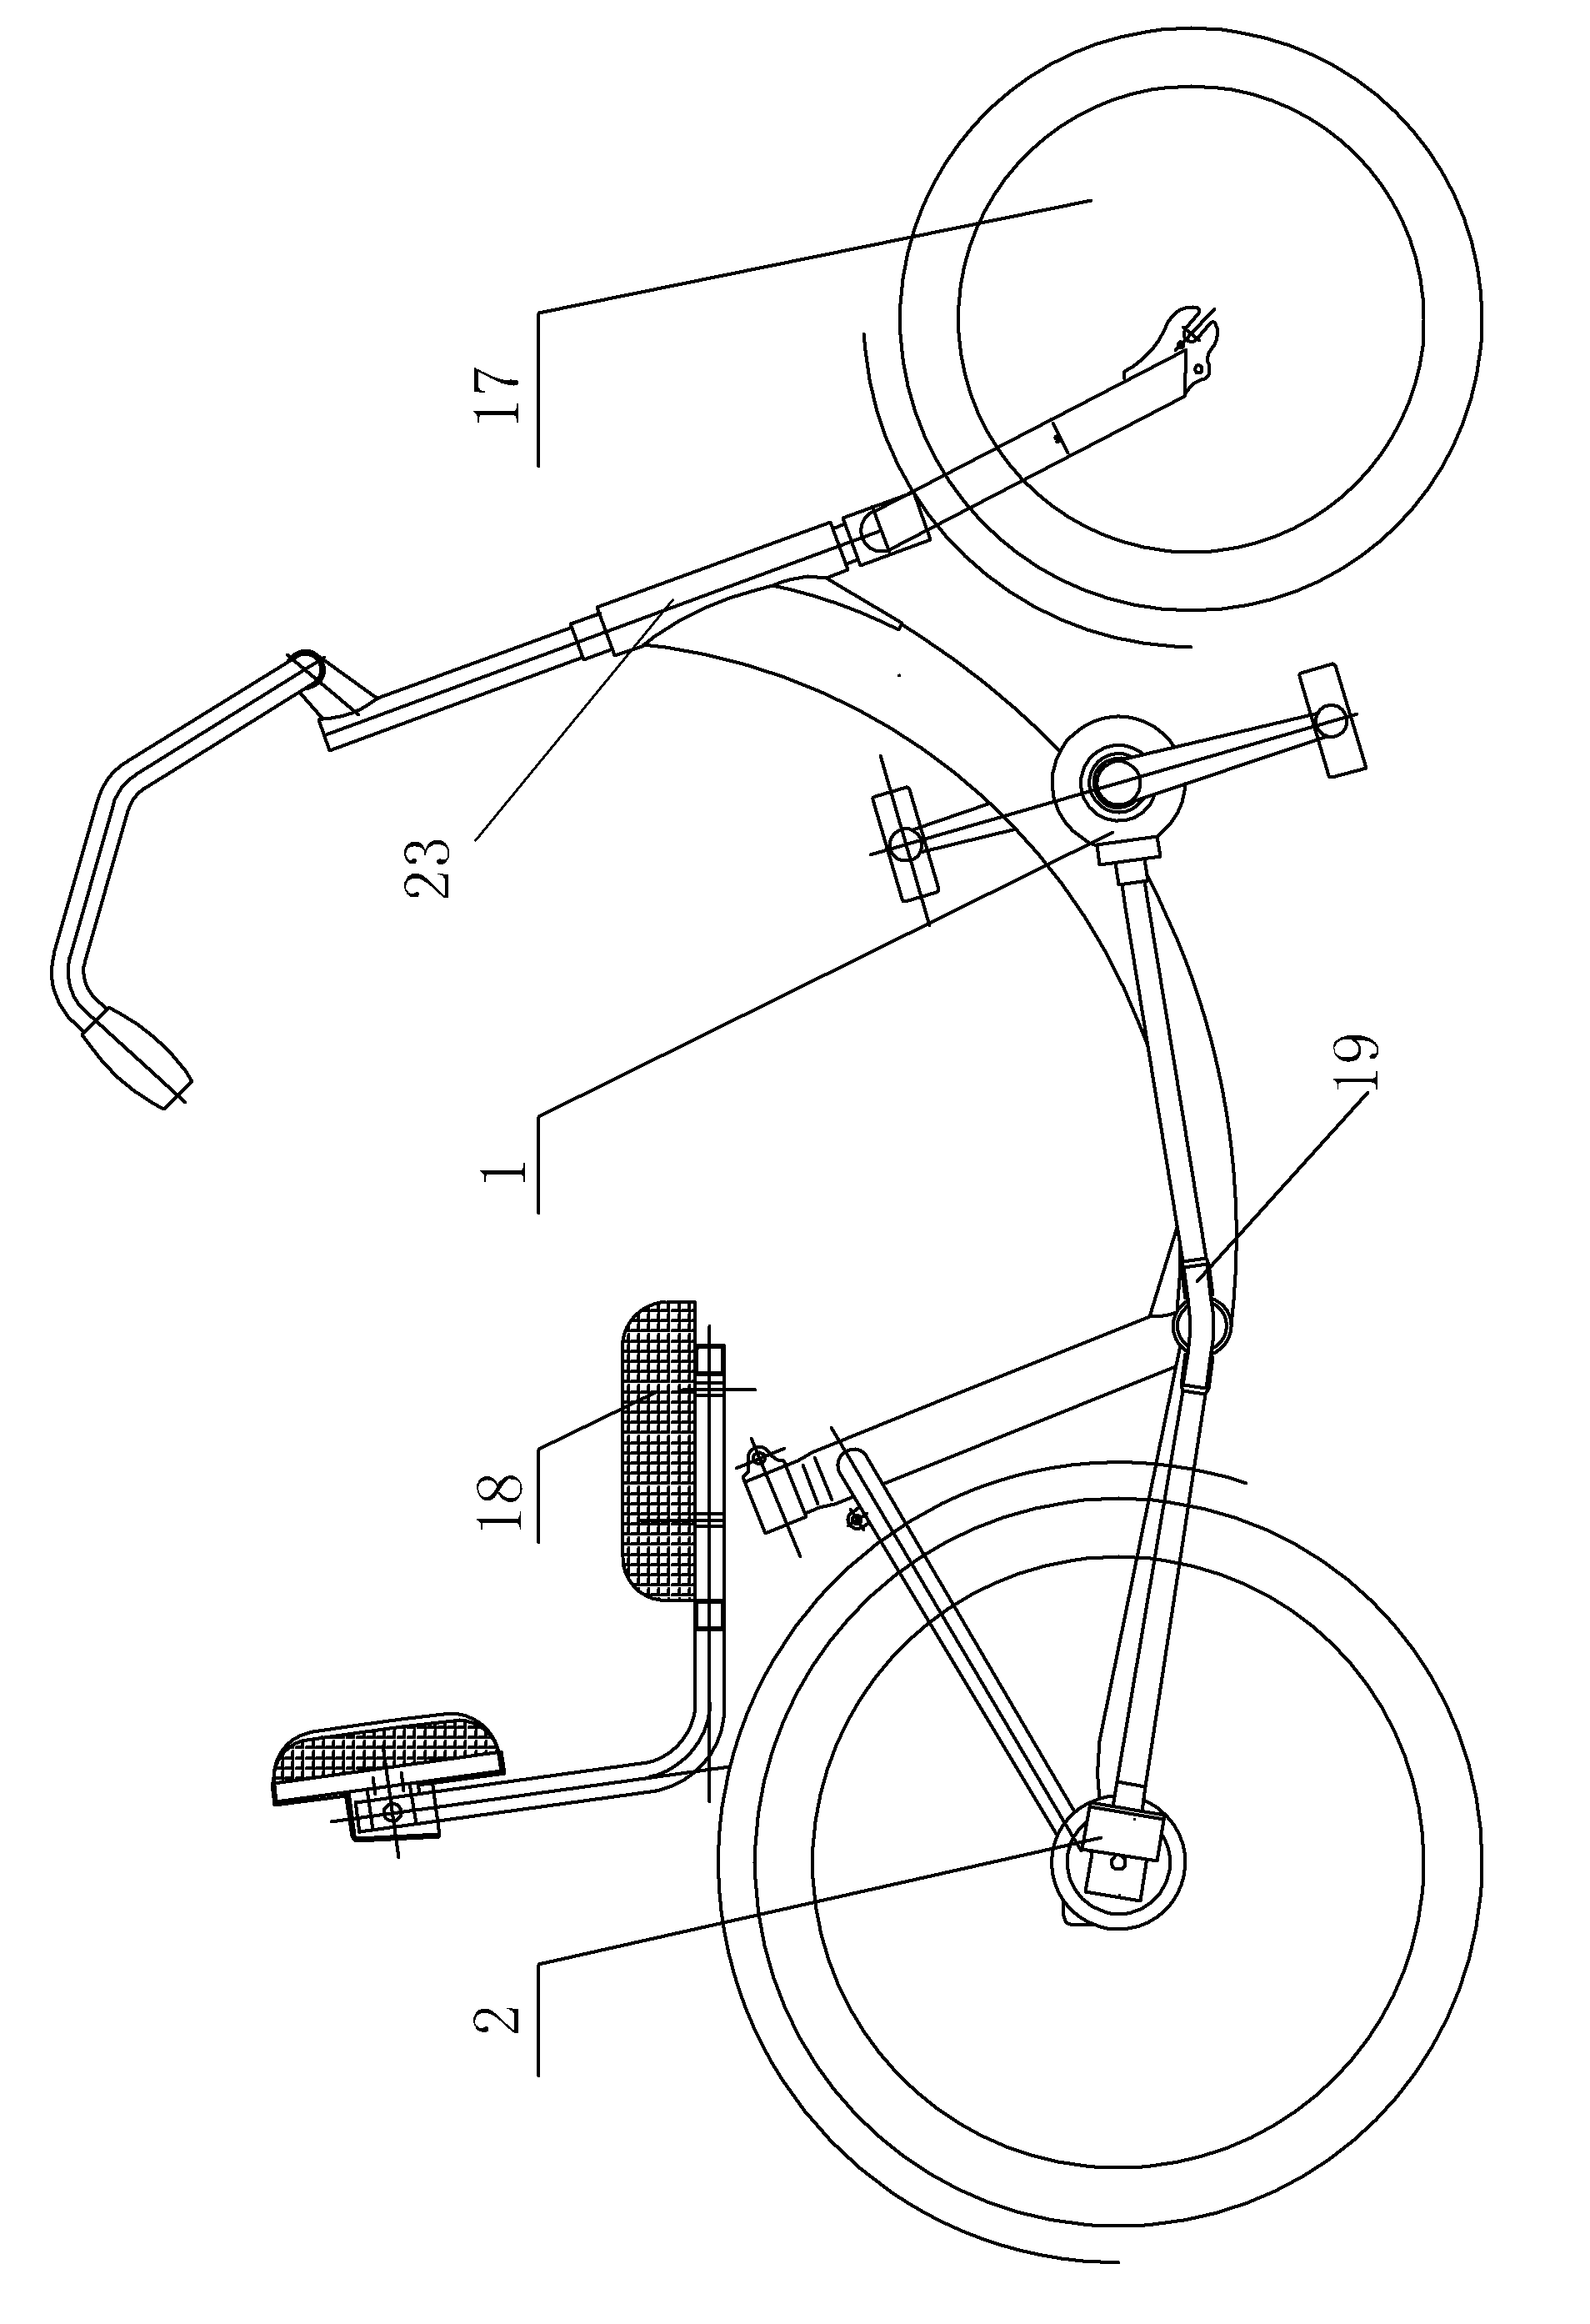 Seat type axle-driven bicycle